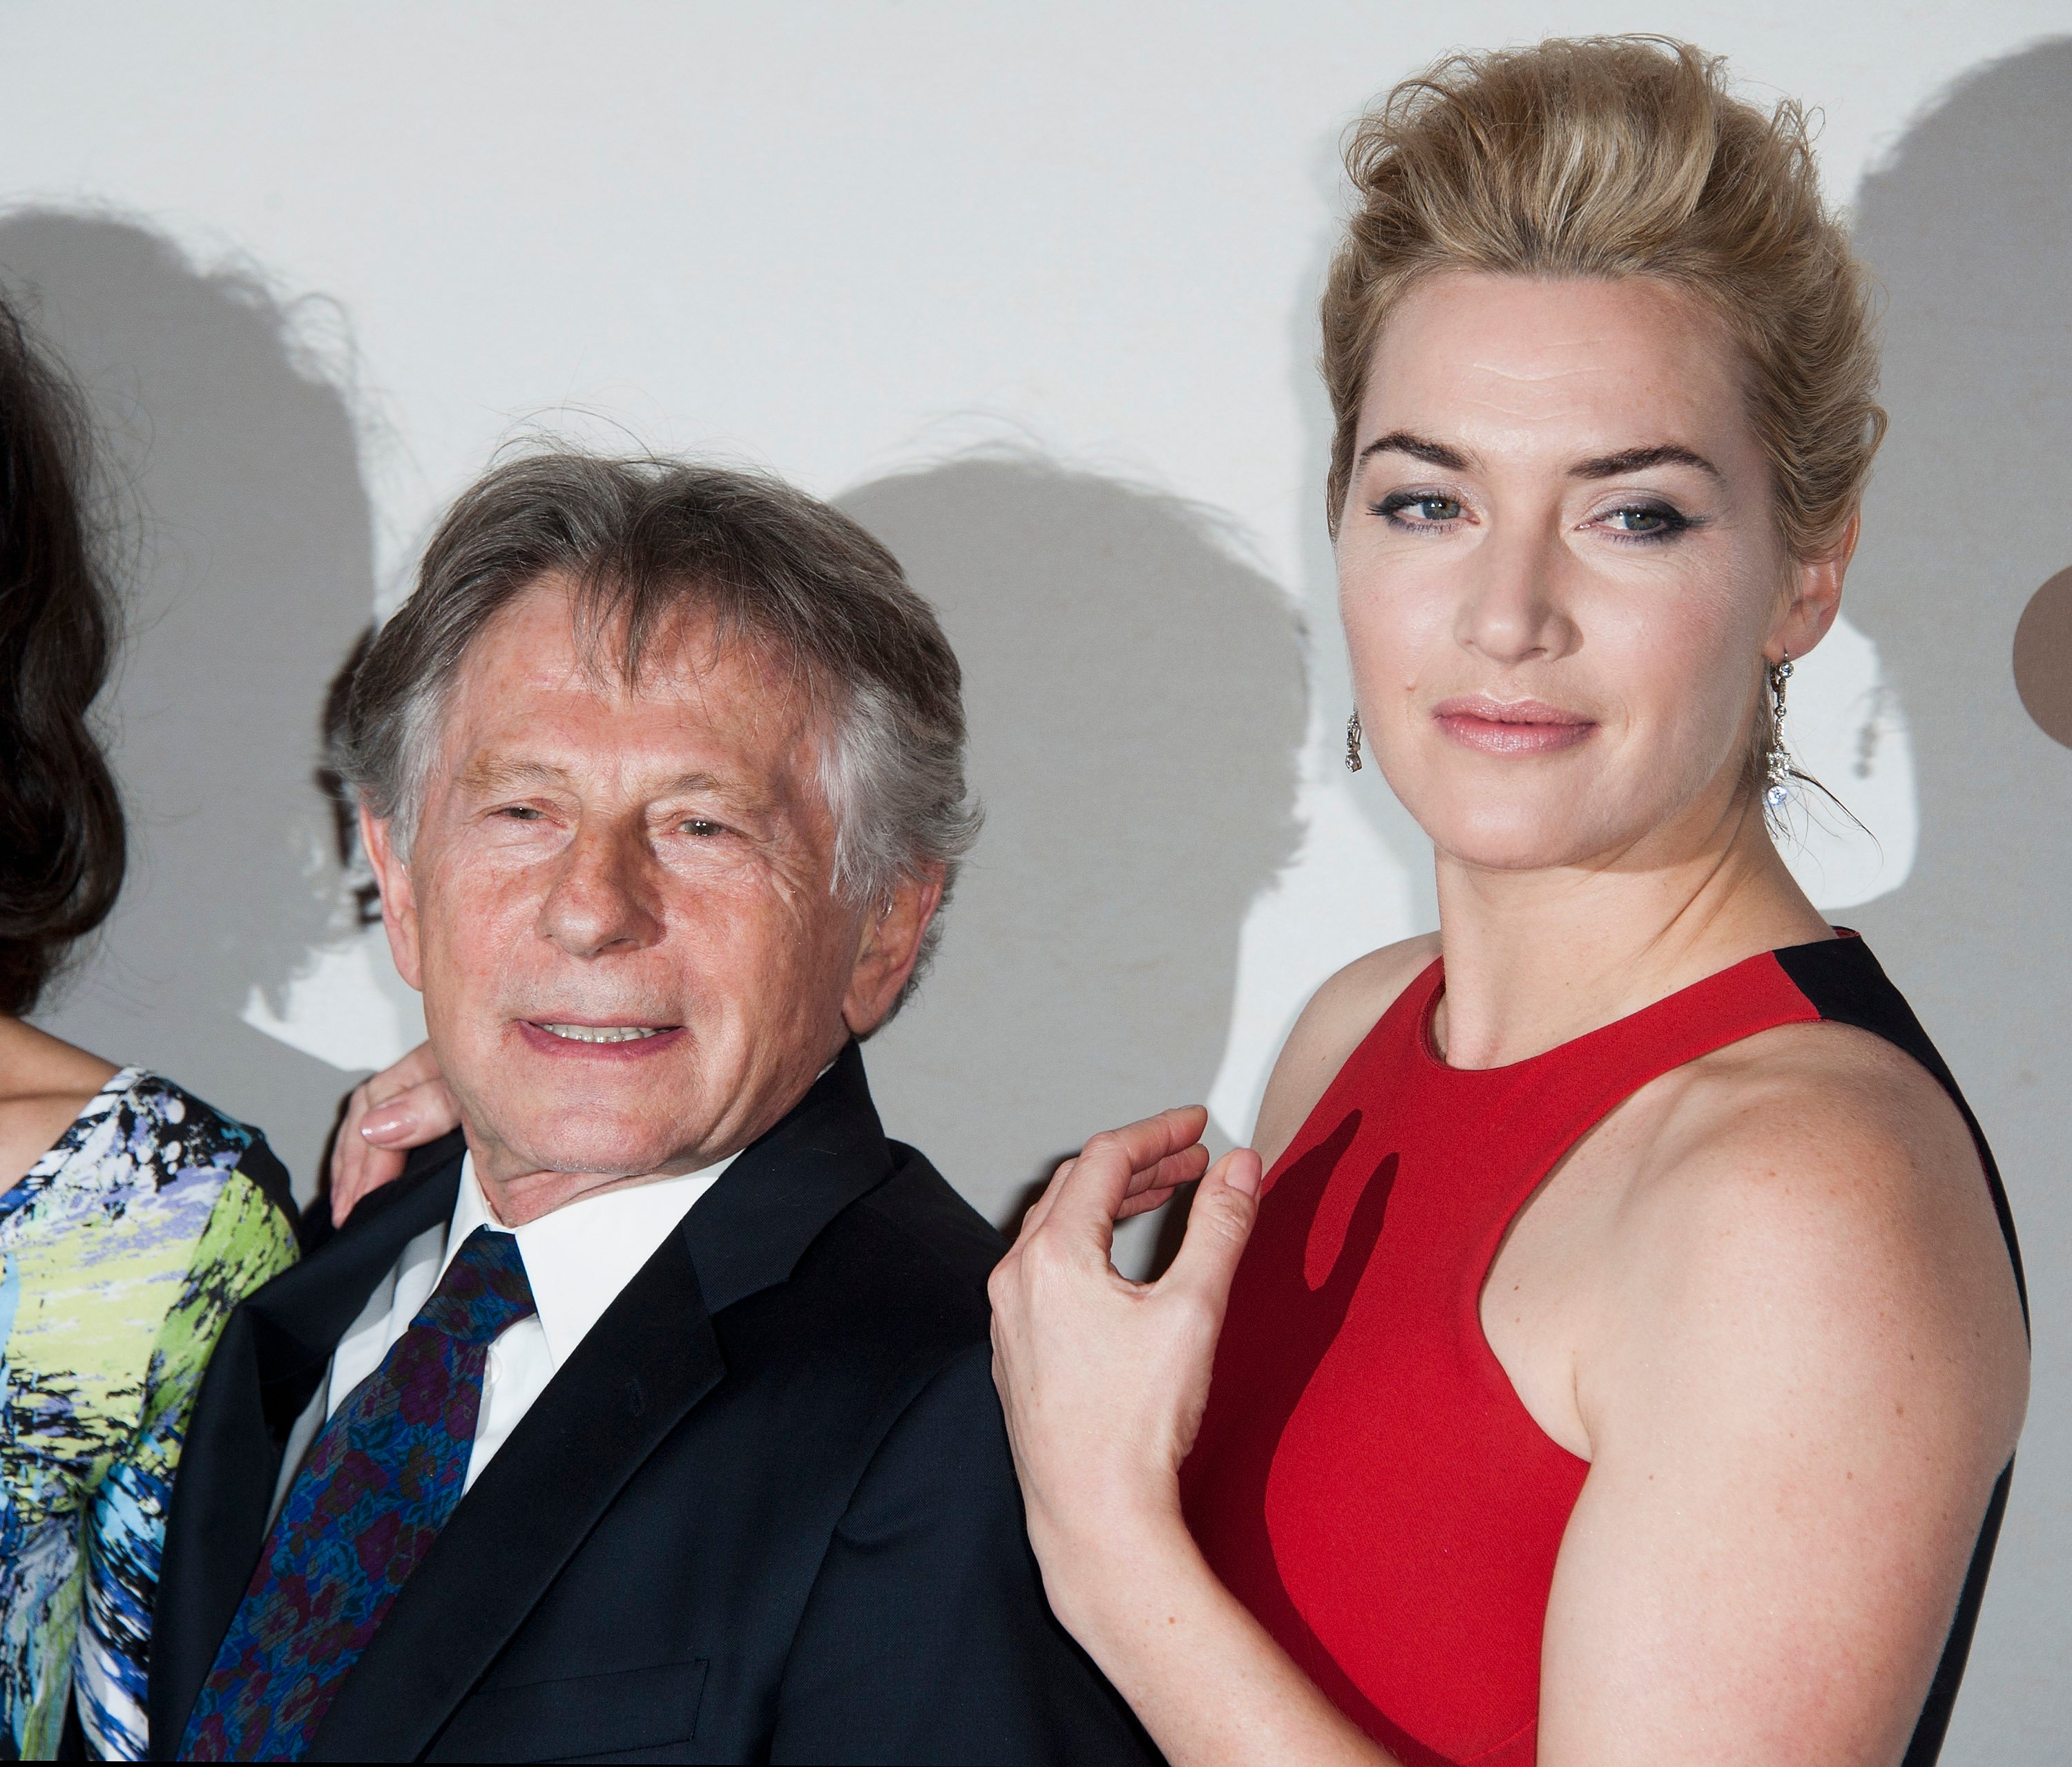 Kate Winslet and Roman Polanski attend the premiere of 'Carnage' on November 20, 2011 in Paris, France.